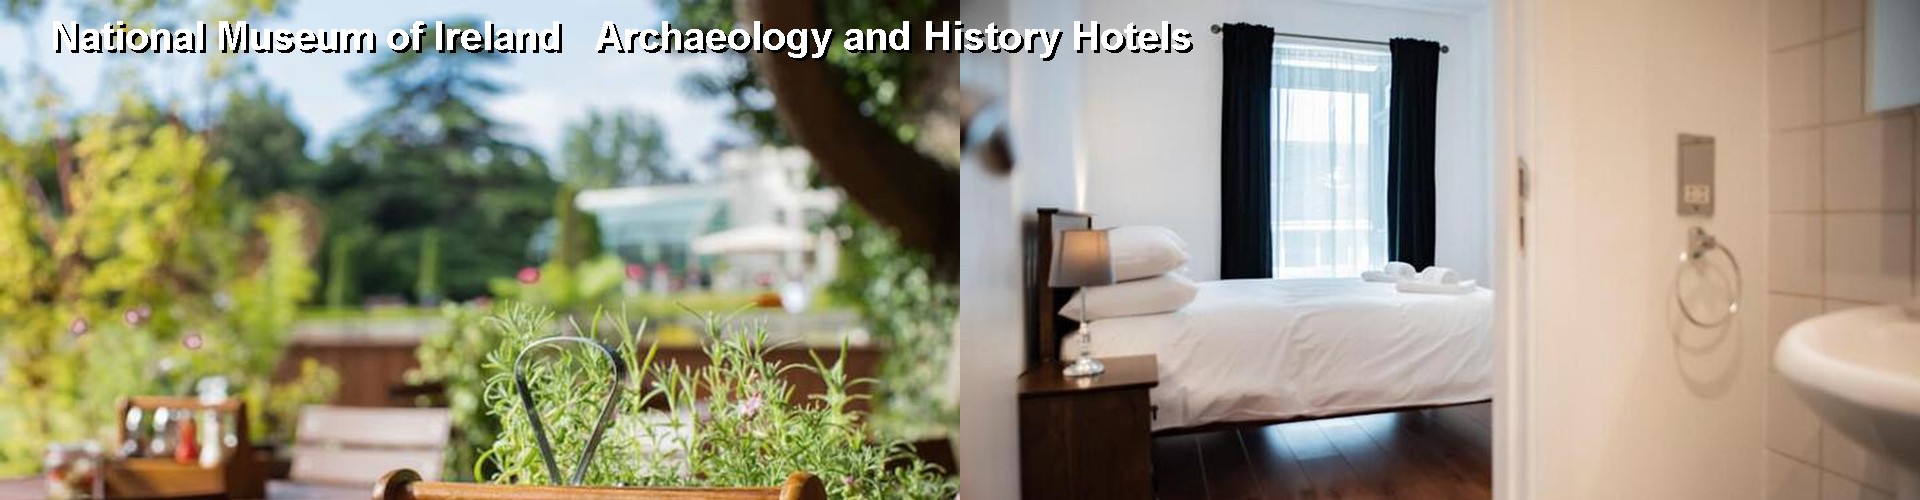 5 Best Hotels near National Museum of Ireland   Archaeology and History